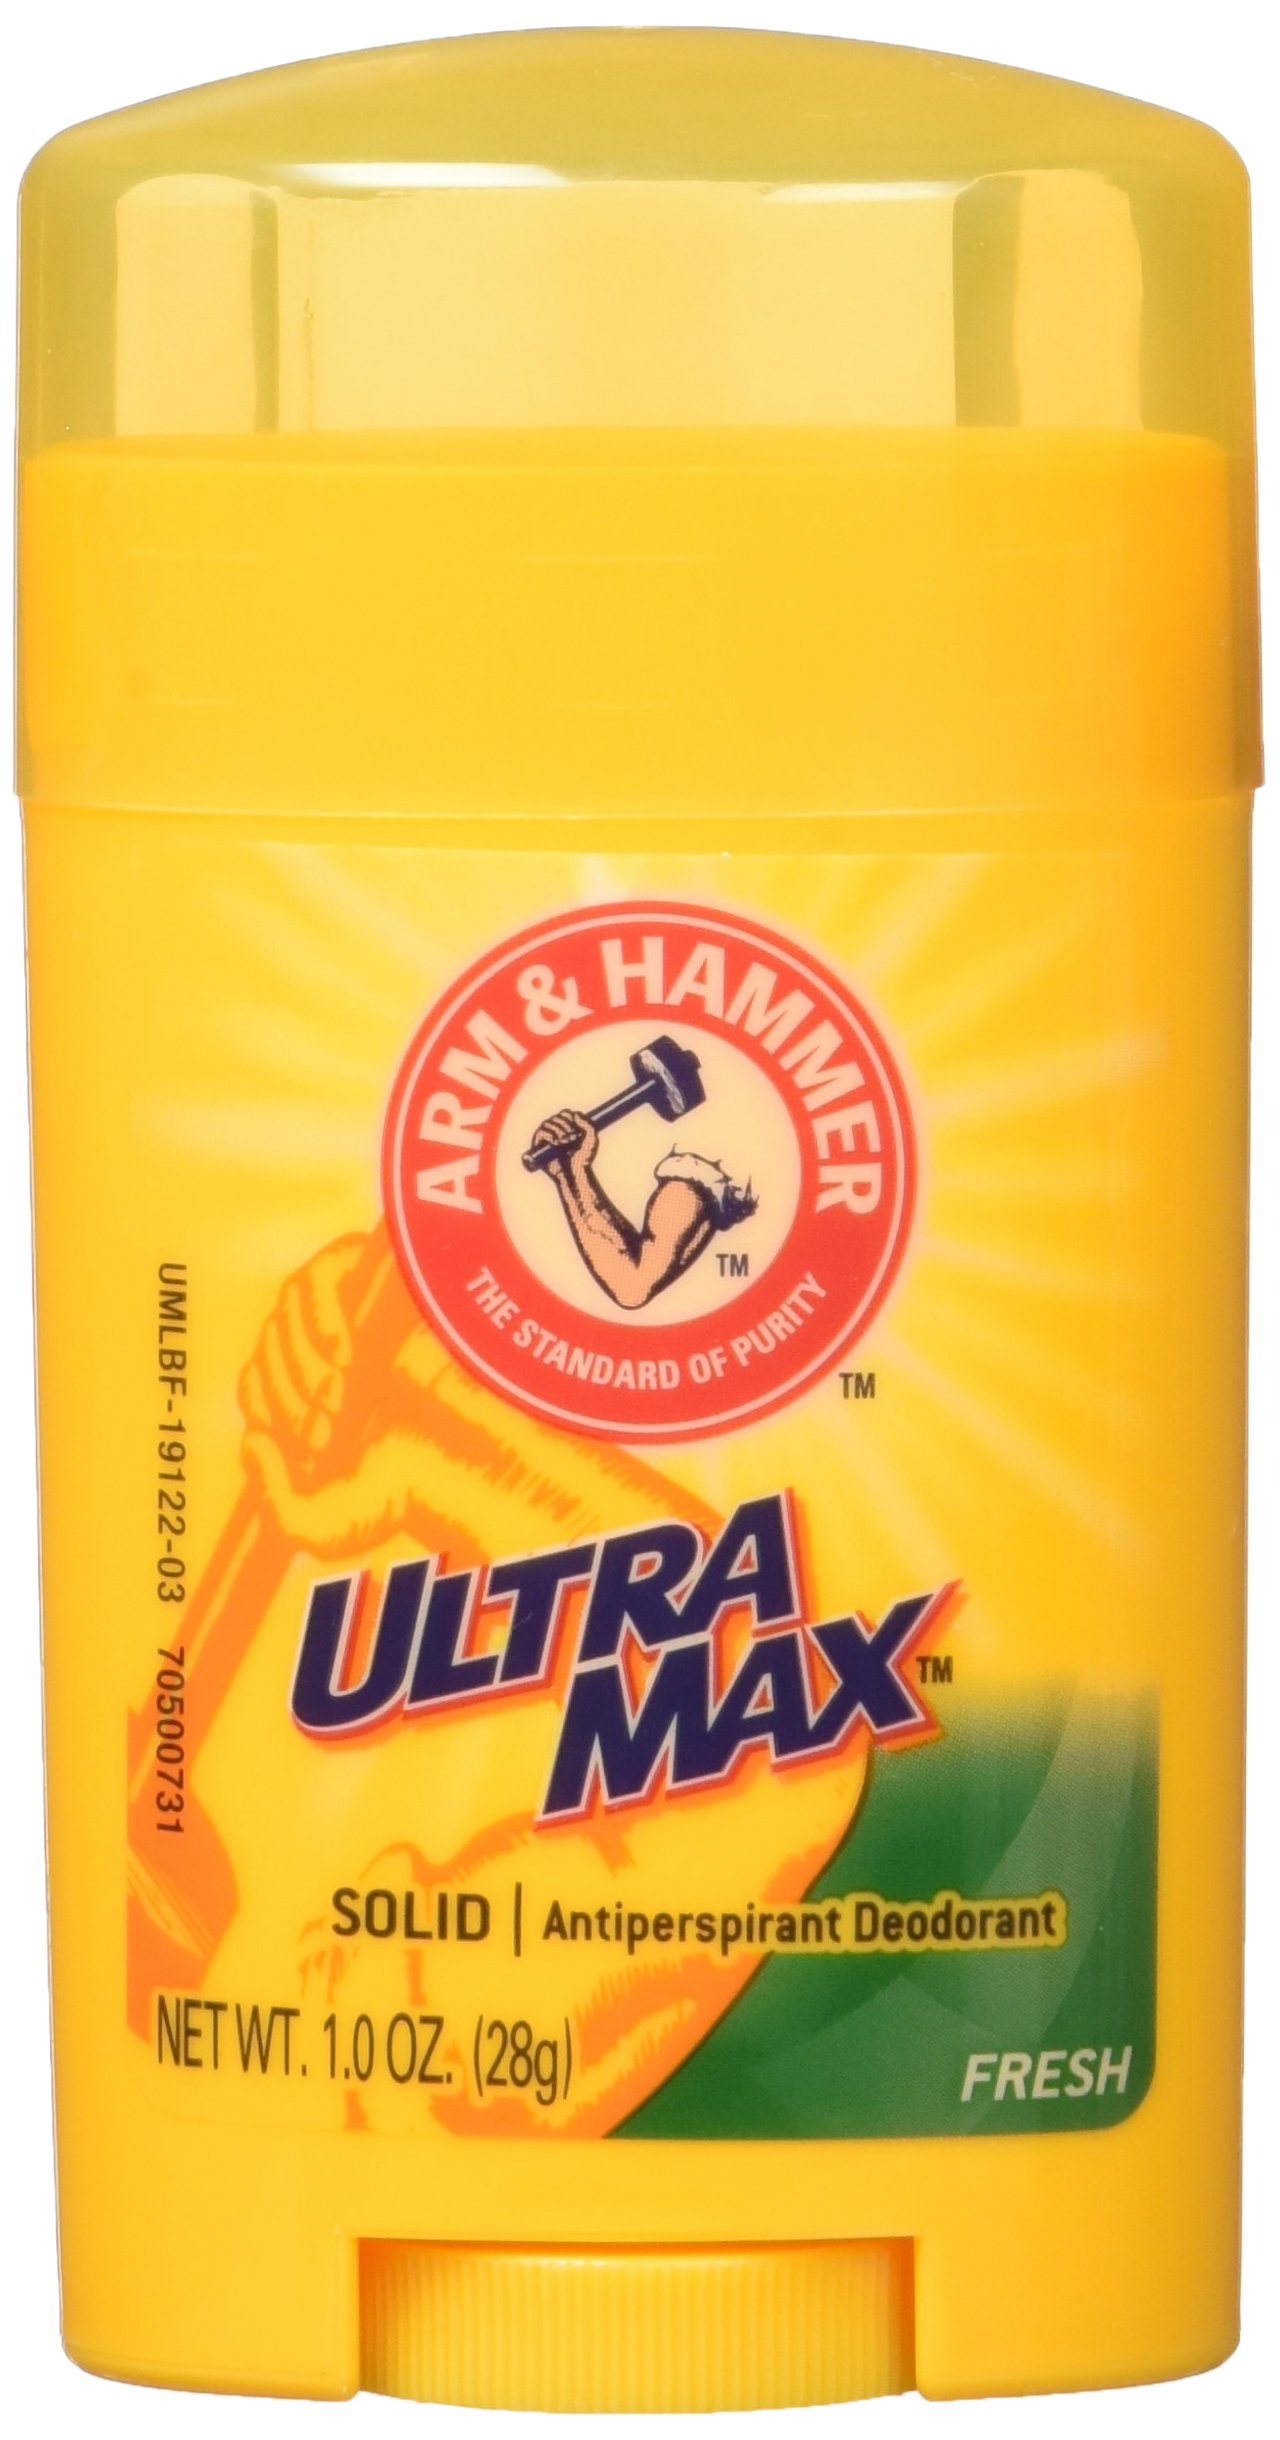 Arm & Hammer ULTRA-MAX Antiperspirant/Deodorant, Fresh INVISIBLE SOLID, Net wt 3.0 oz, (1.0 oz/stick) by Arm & Hammer